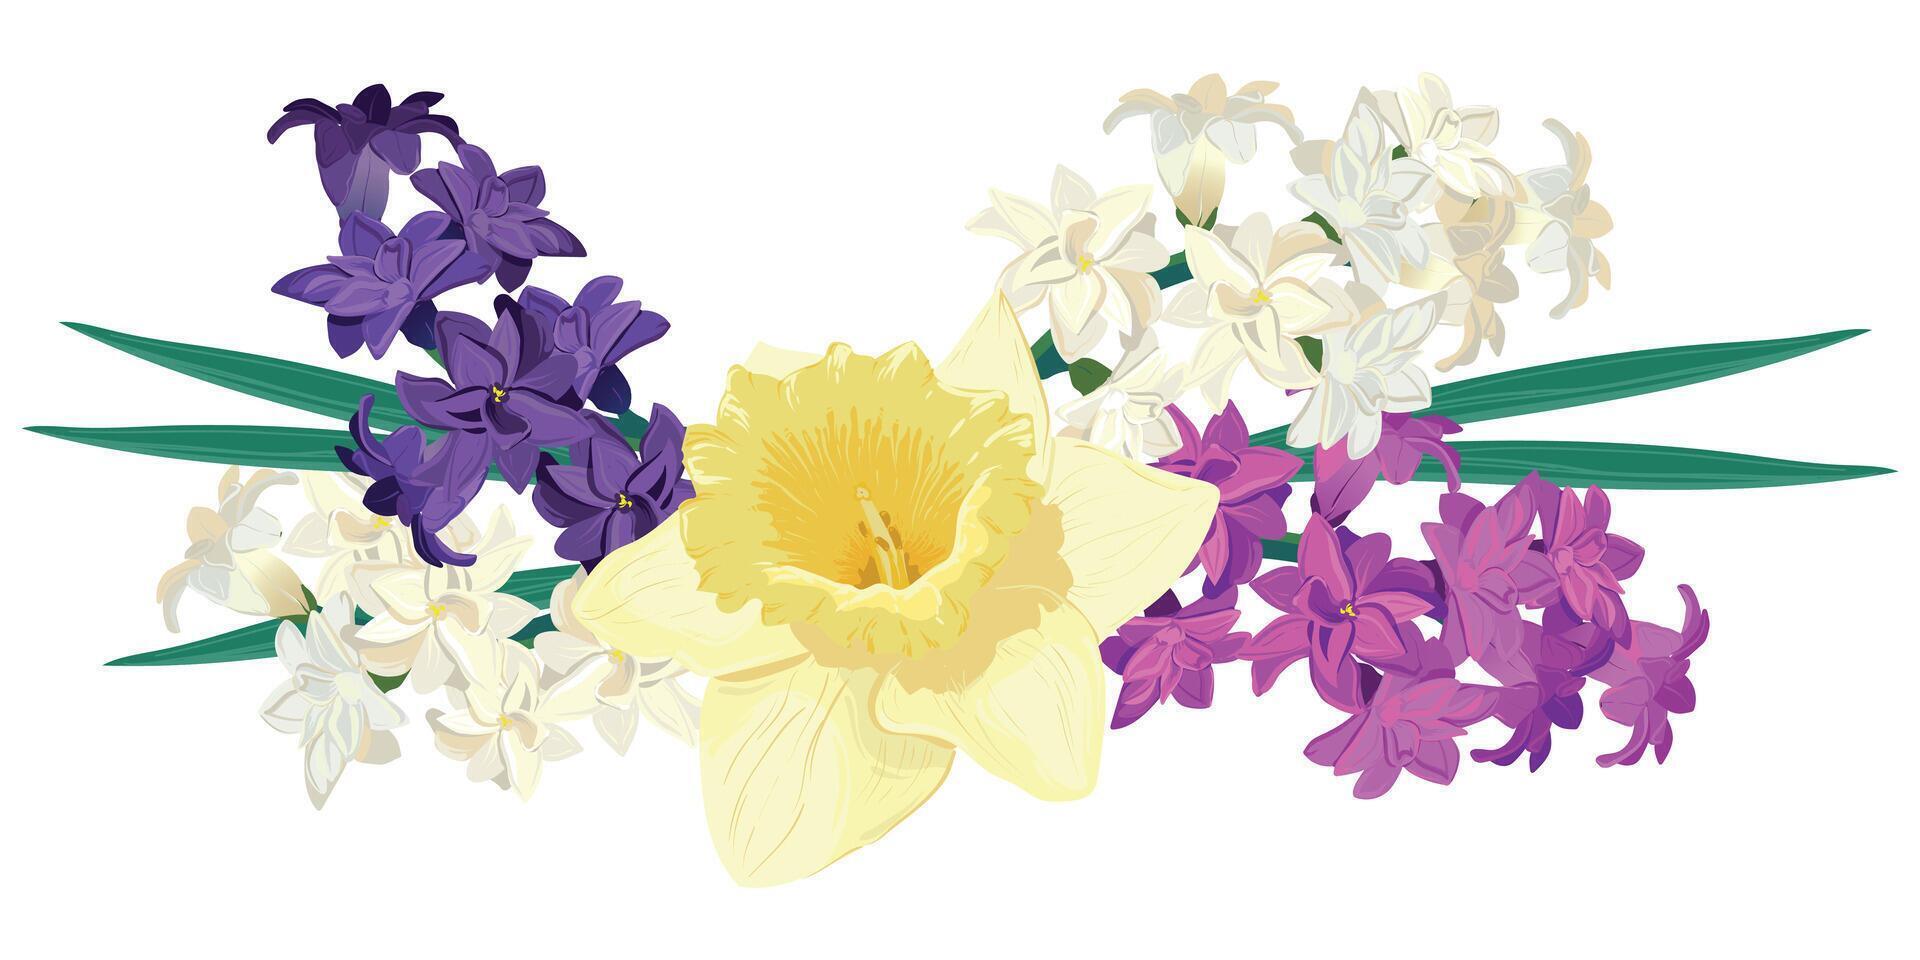 Composition of bright spring flowers. Vector colored hyacinths and yellow daffodils on a white background. Primroses in a cartoon style are suitable for greeting cards for Mother's Day and Women's Day